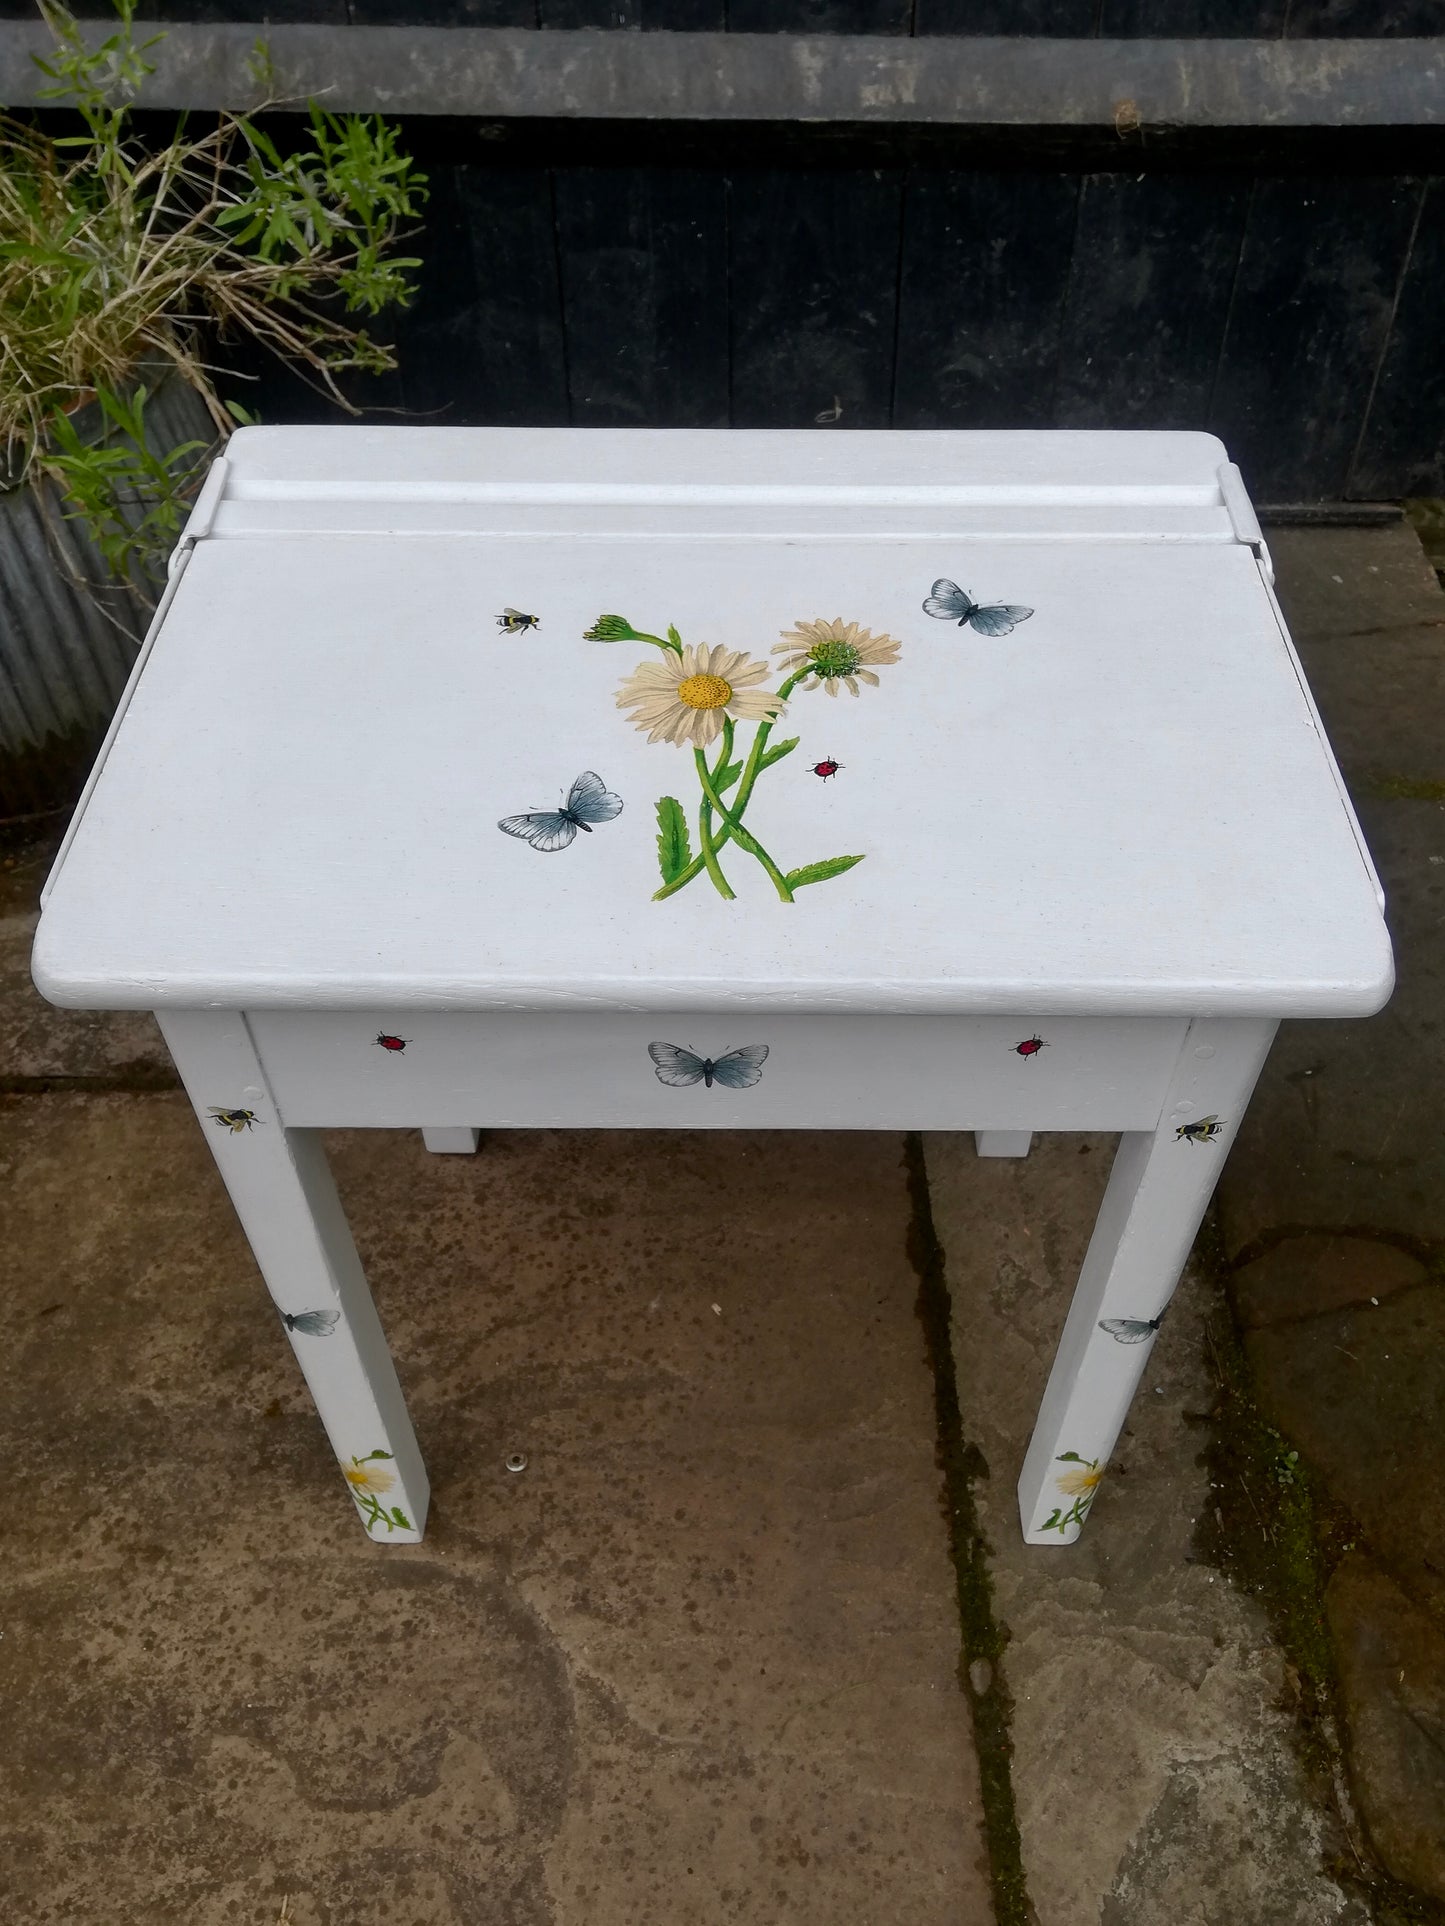 Children's painted desk - bees and butterfly theme